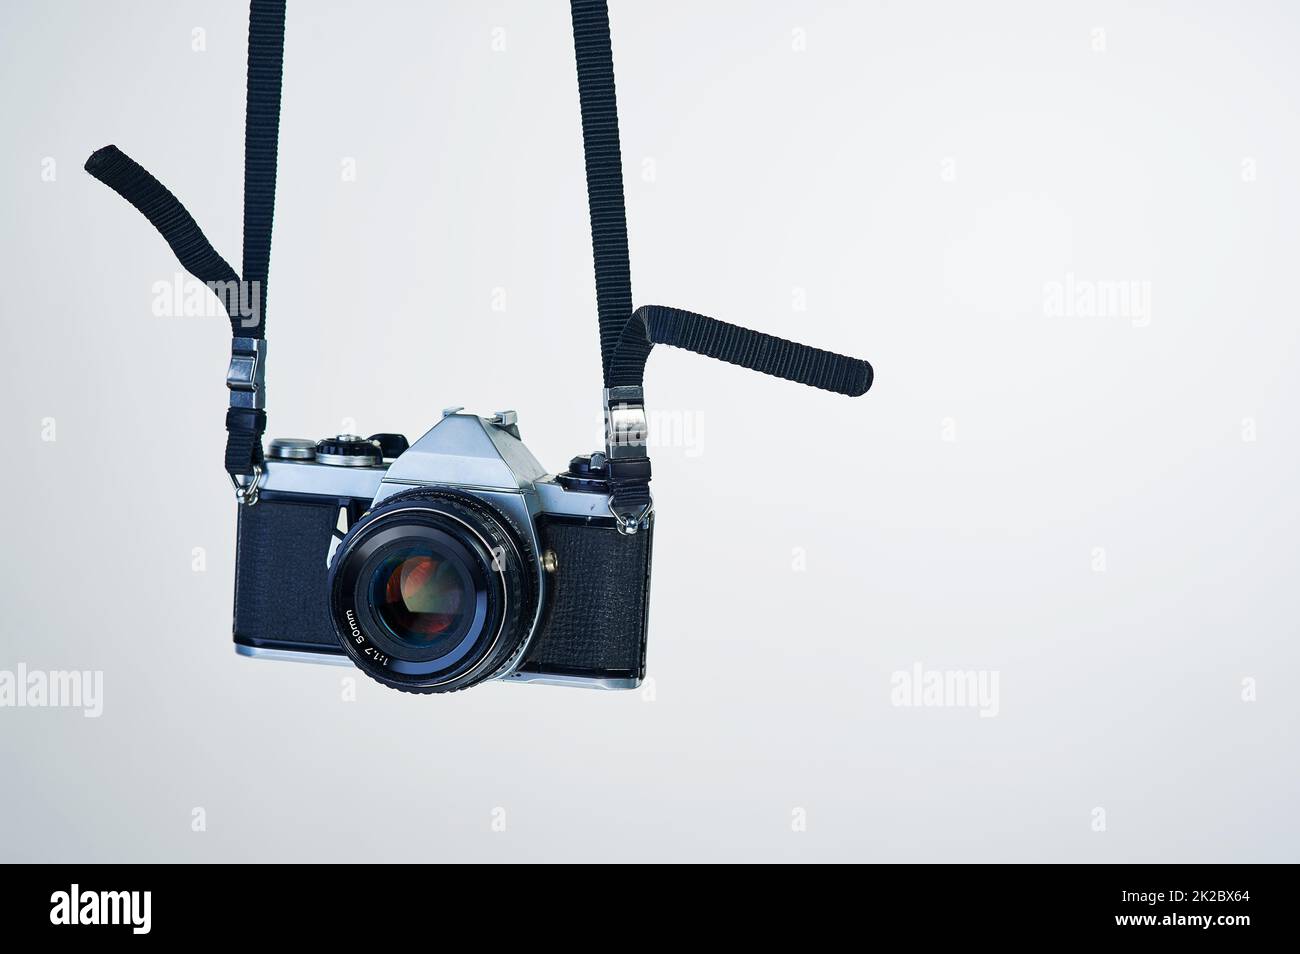 Film photography makes a comeback. Studio shot of a camera hanging by its strap. Stock Photo